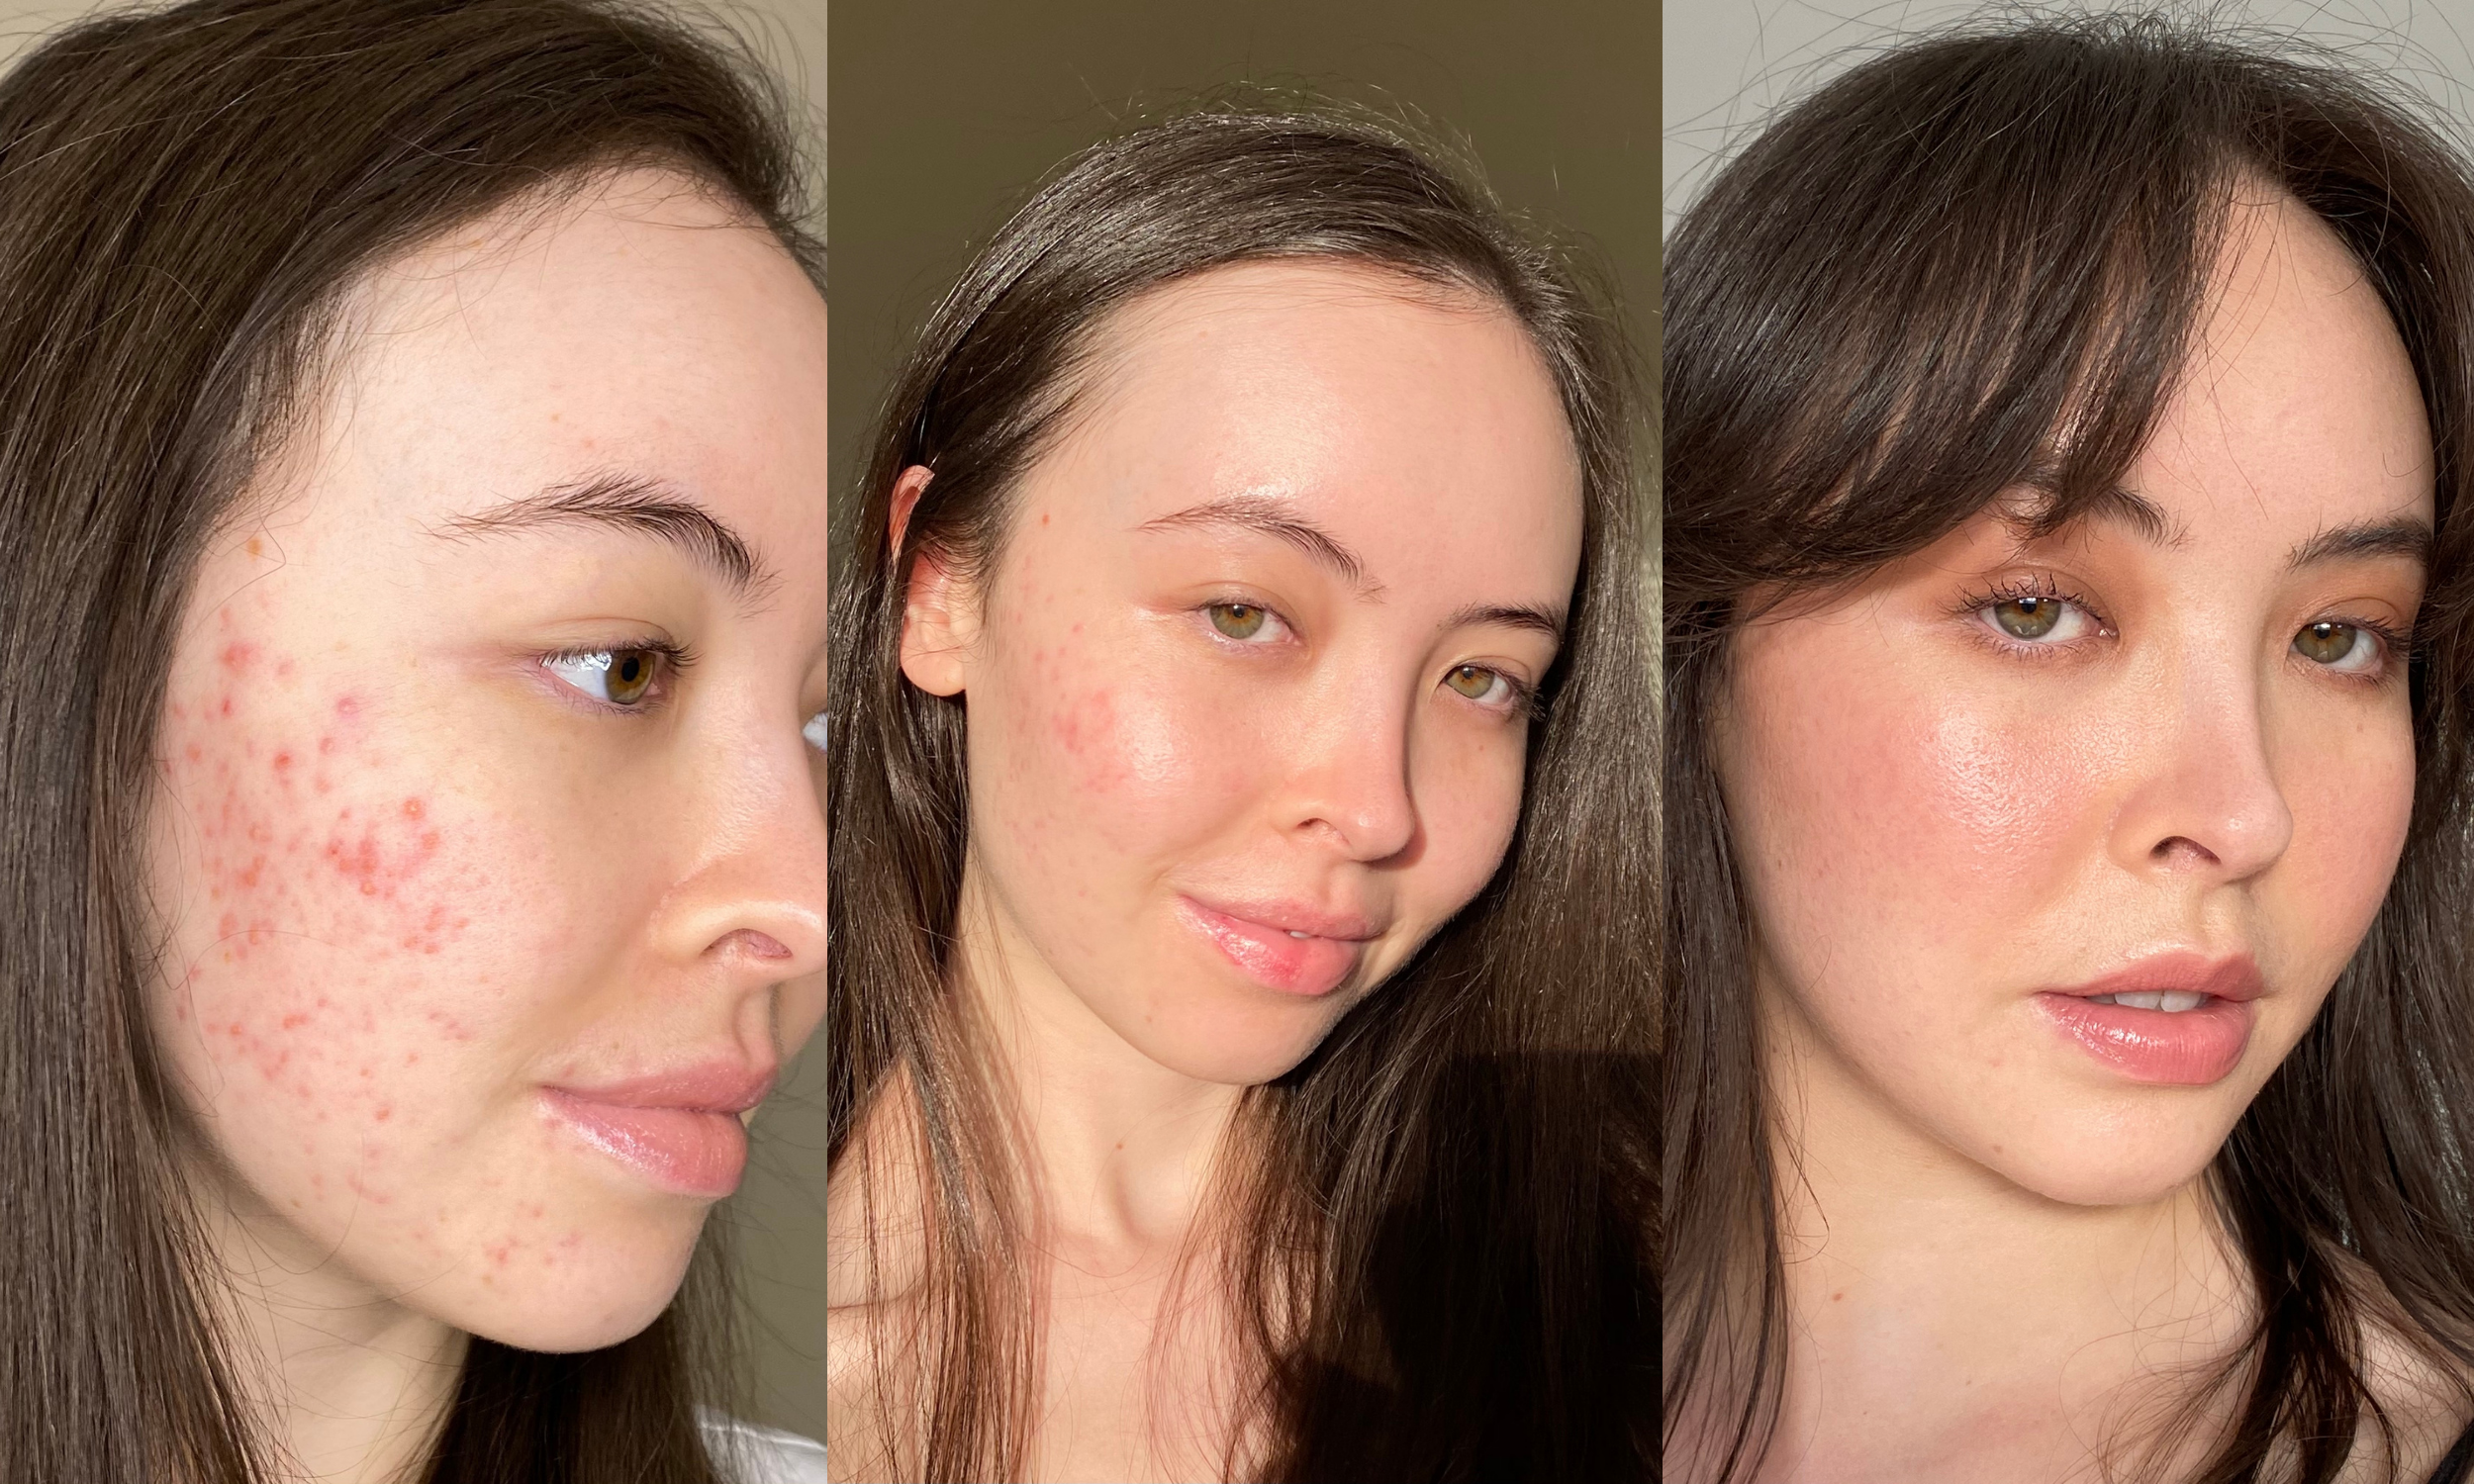 Three pictures of Emily (@sunshineskin) and her journey with acne.